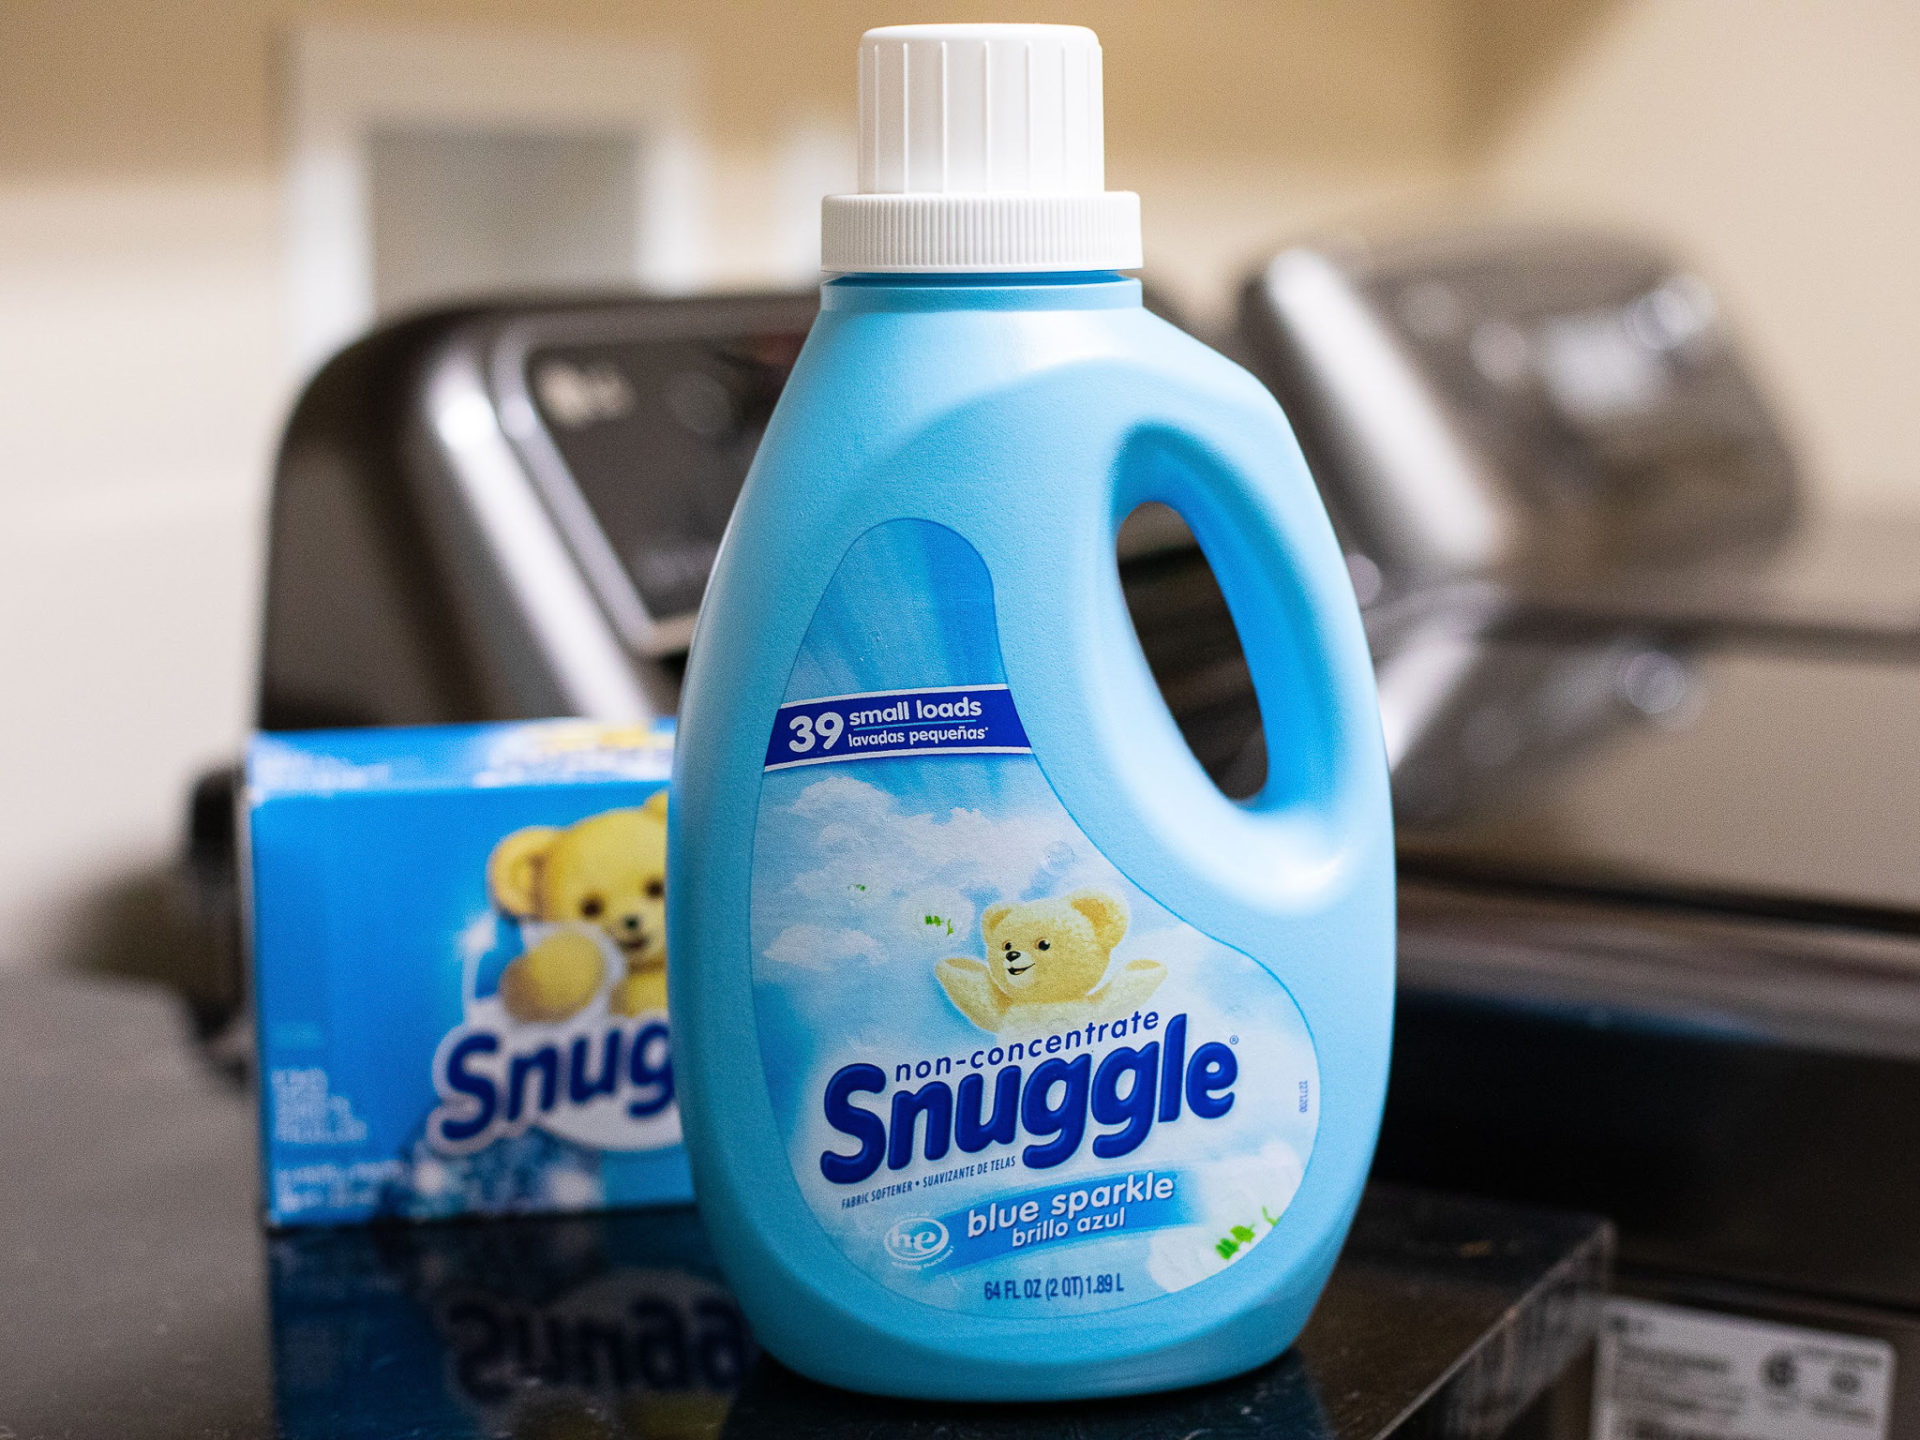 Snuggle Fabric Softener As Low As $1.49 At Kroger